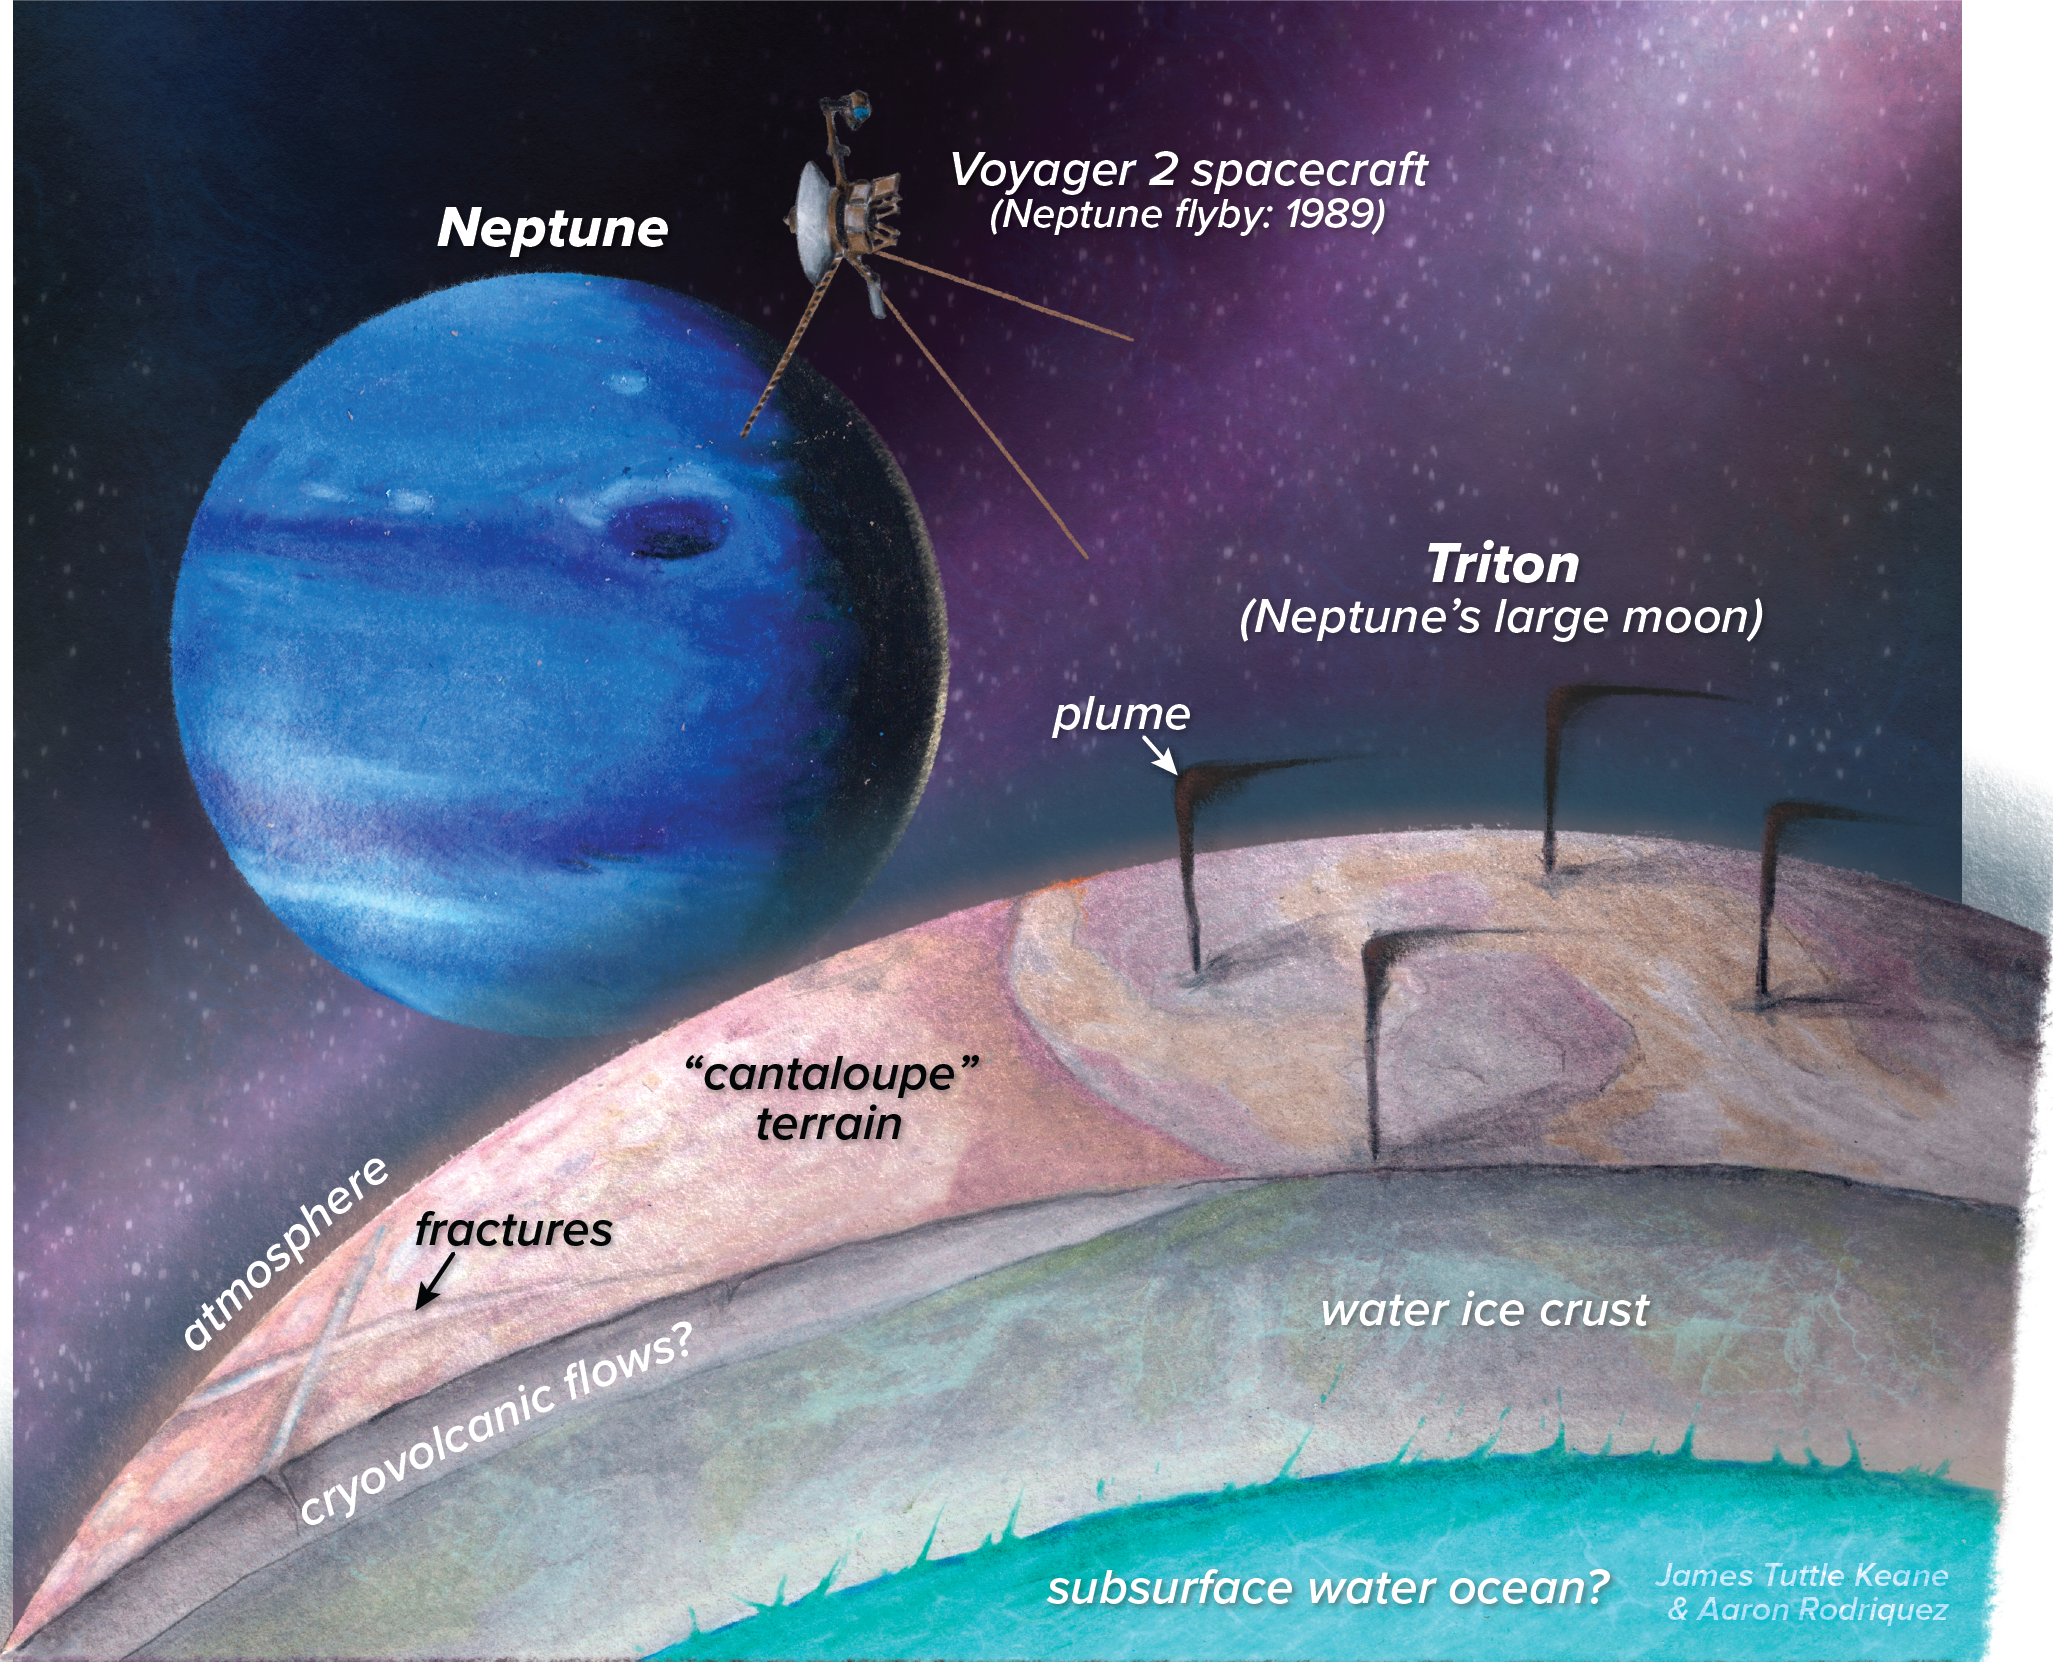 The largest of Neptune's 14 known moons, Titan has a criss crossing surface terrain that is thought to overlie a thick crust of water ice and a subsurface ocean.